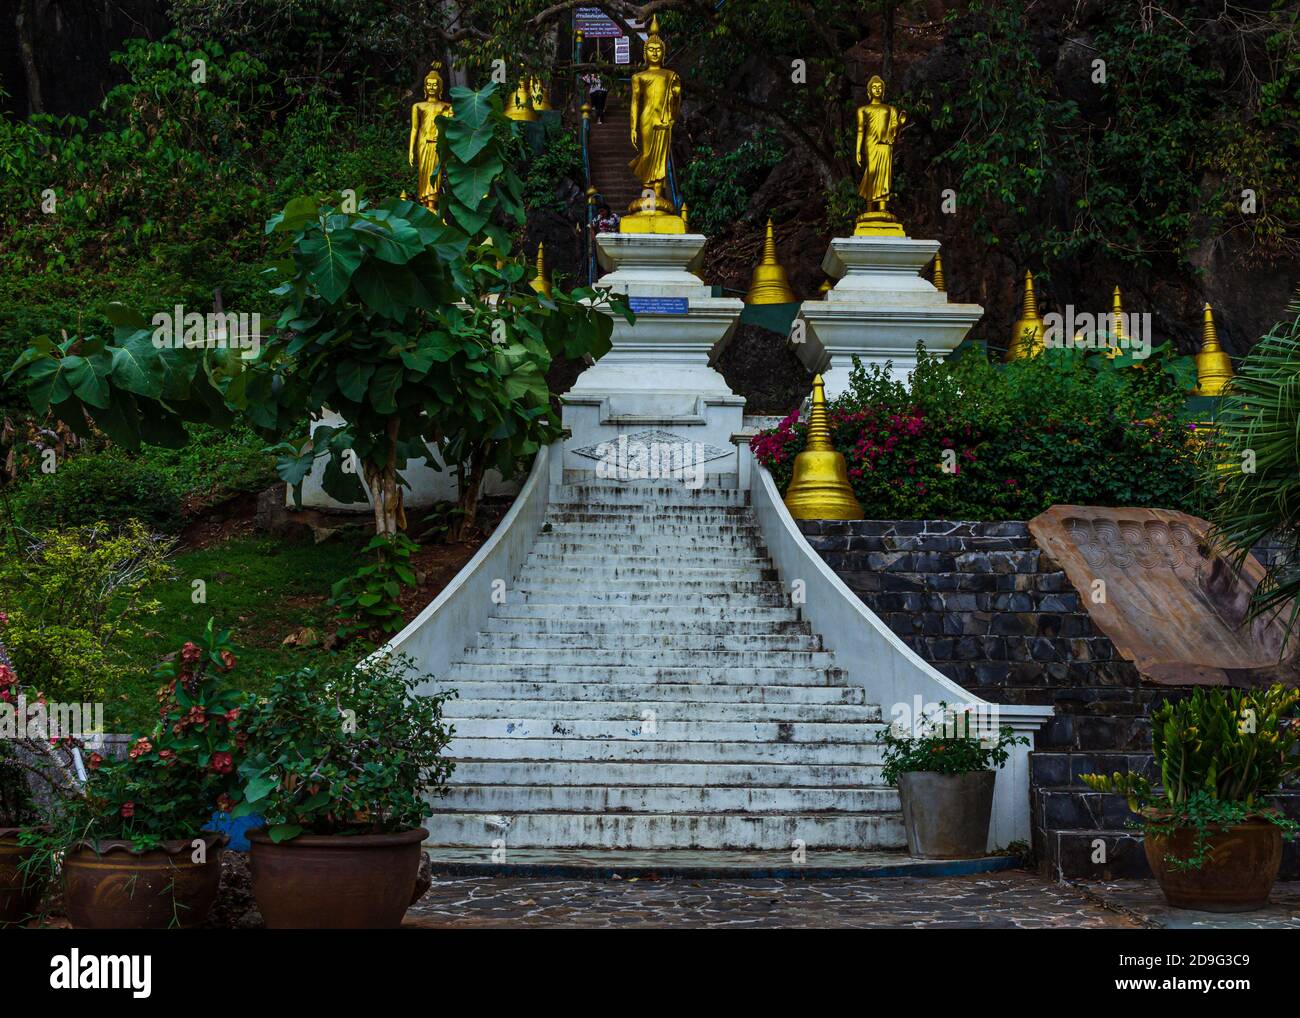 Krabi, Thailand- March 29 2019: Tiger temple decorative white rock stairs, gold budha statues, garden flowers Stock Photo